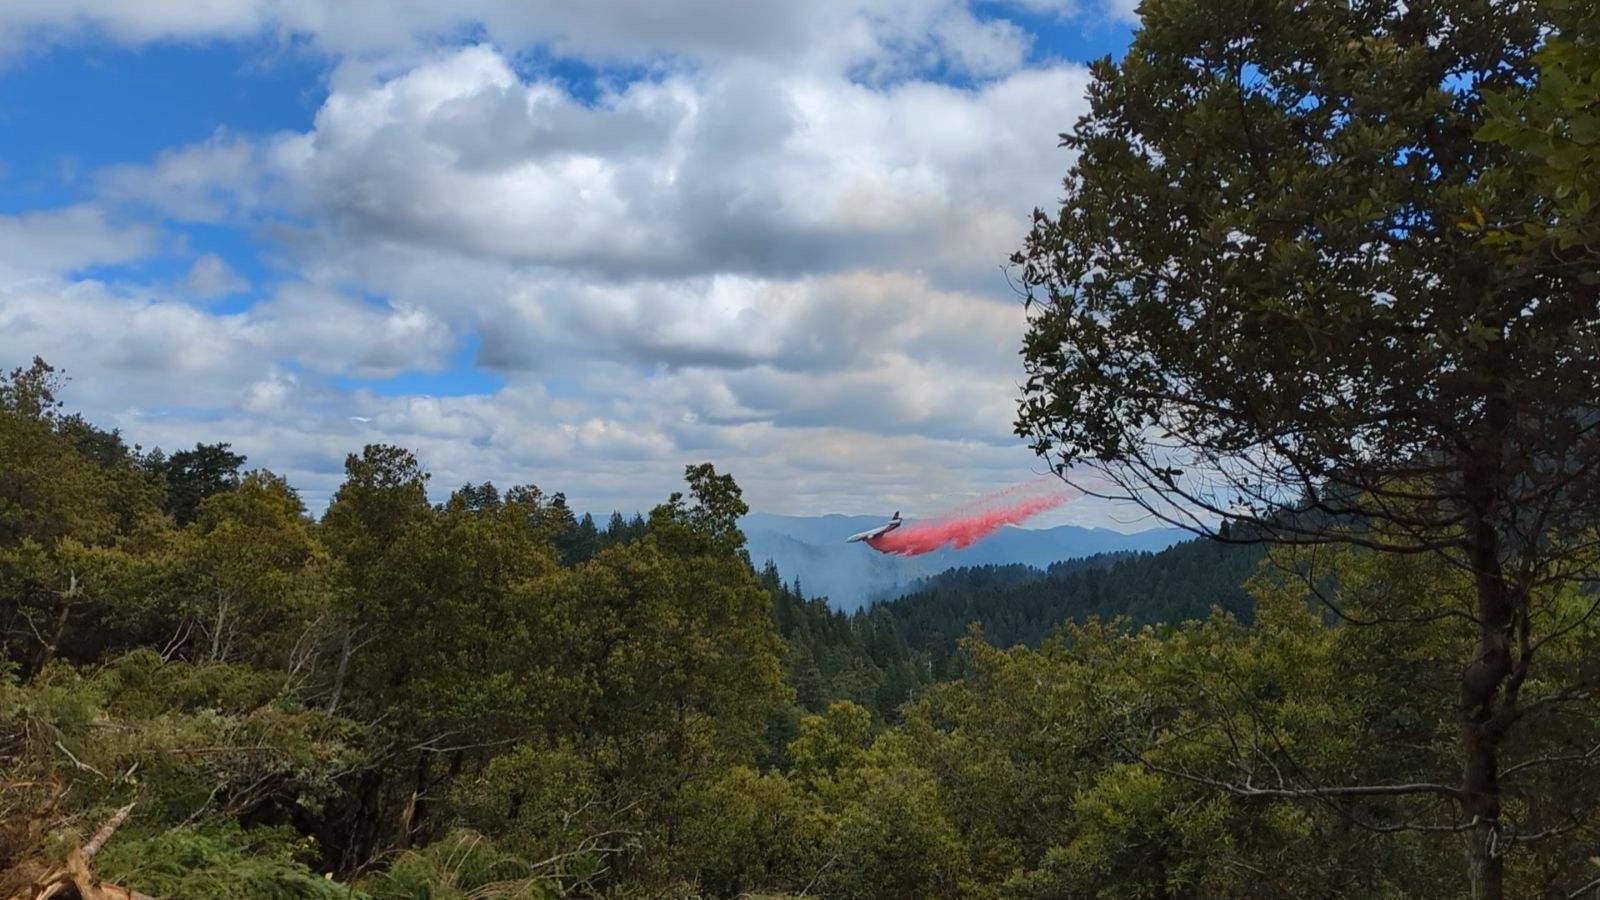 An air tankter drops red retardant over a smoking portion of wilderness. 